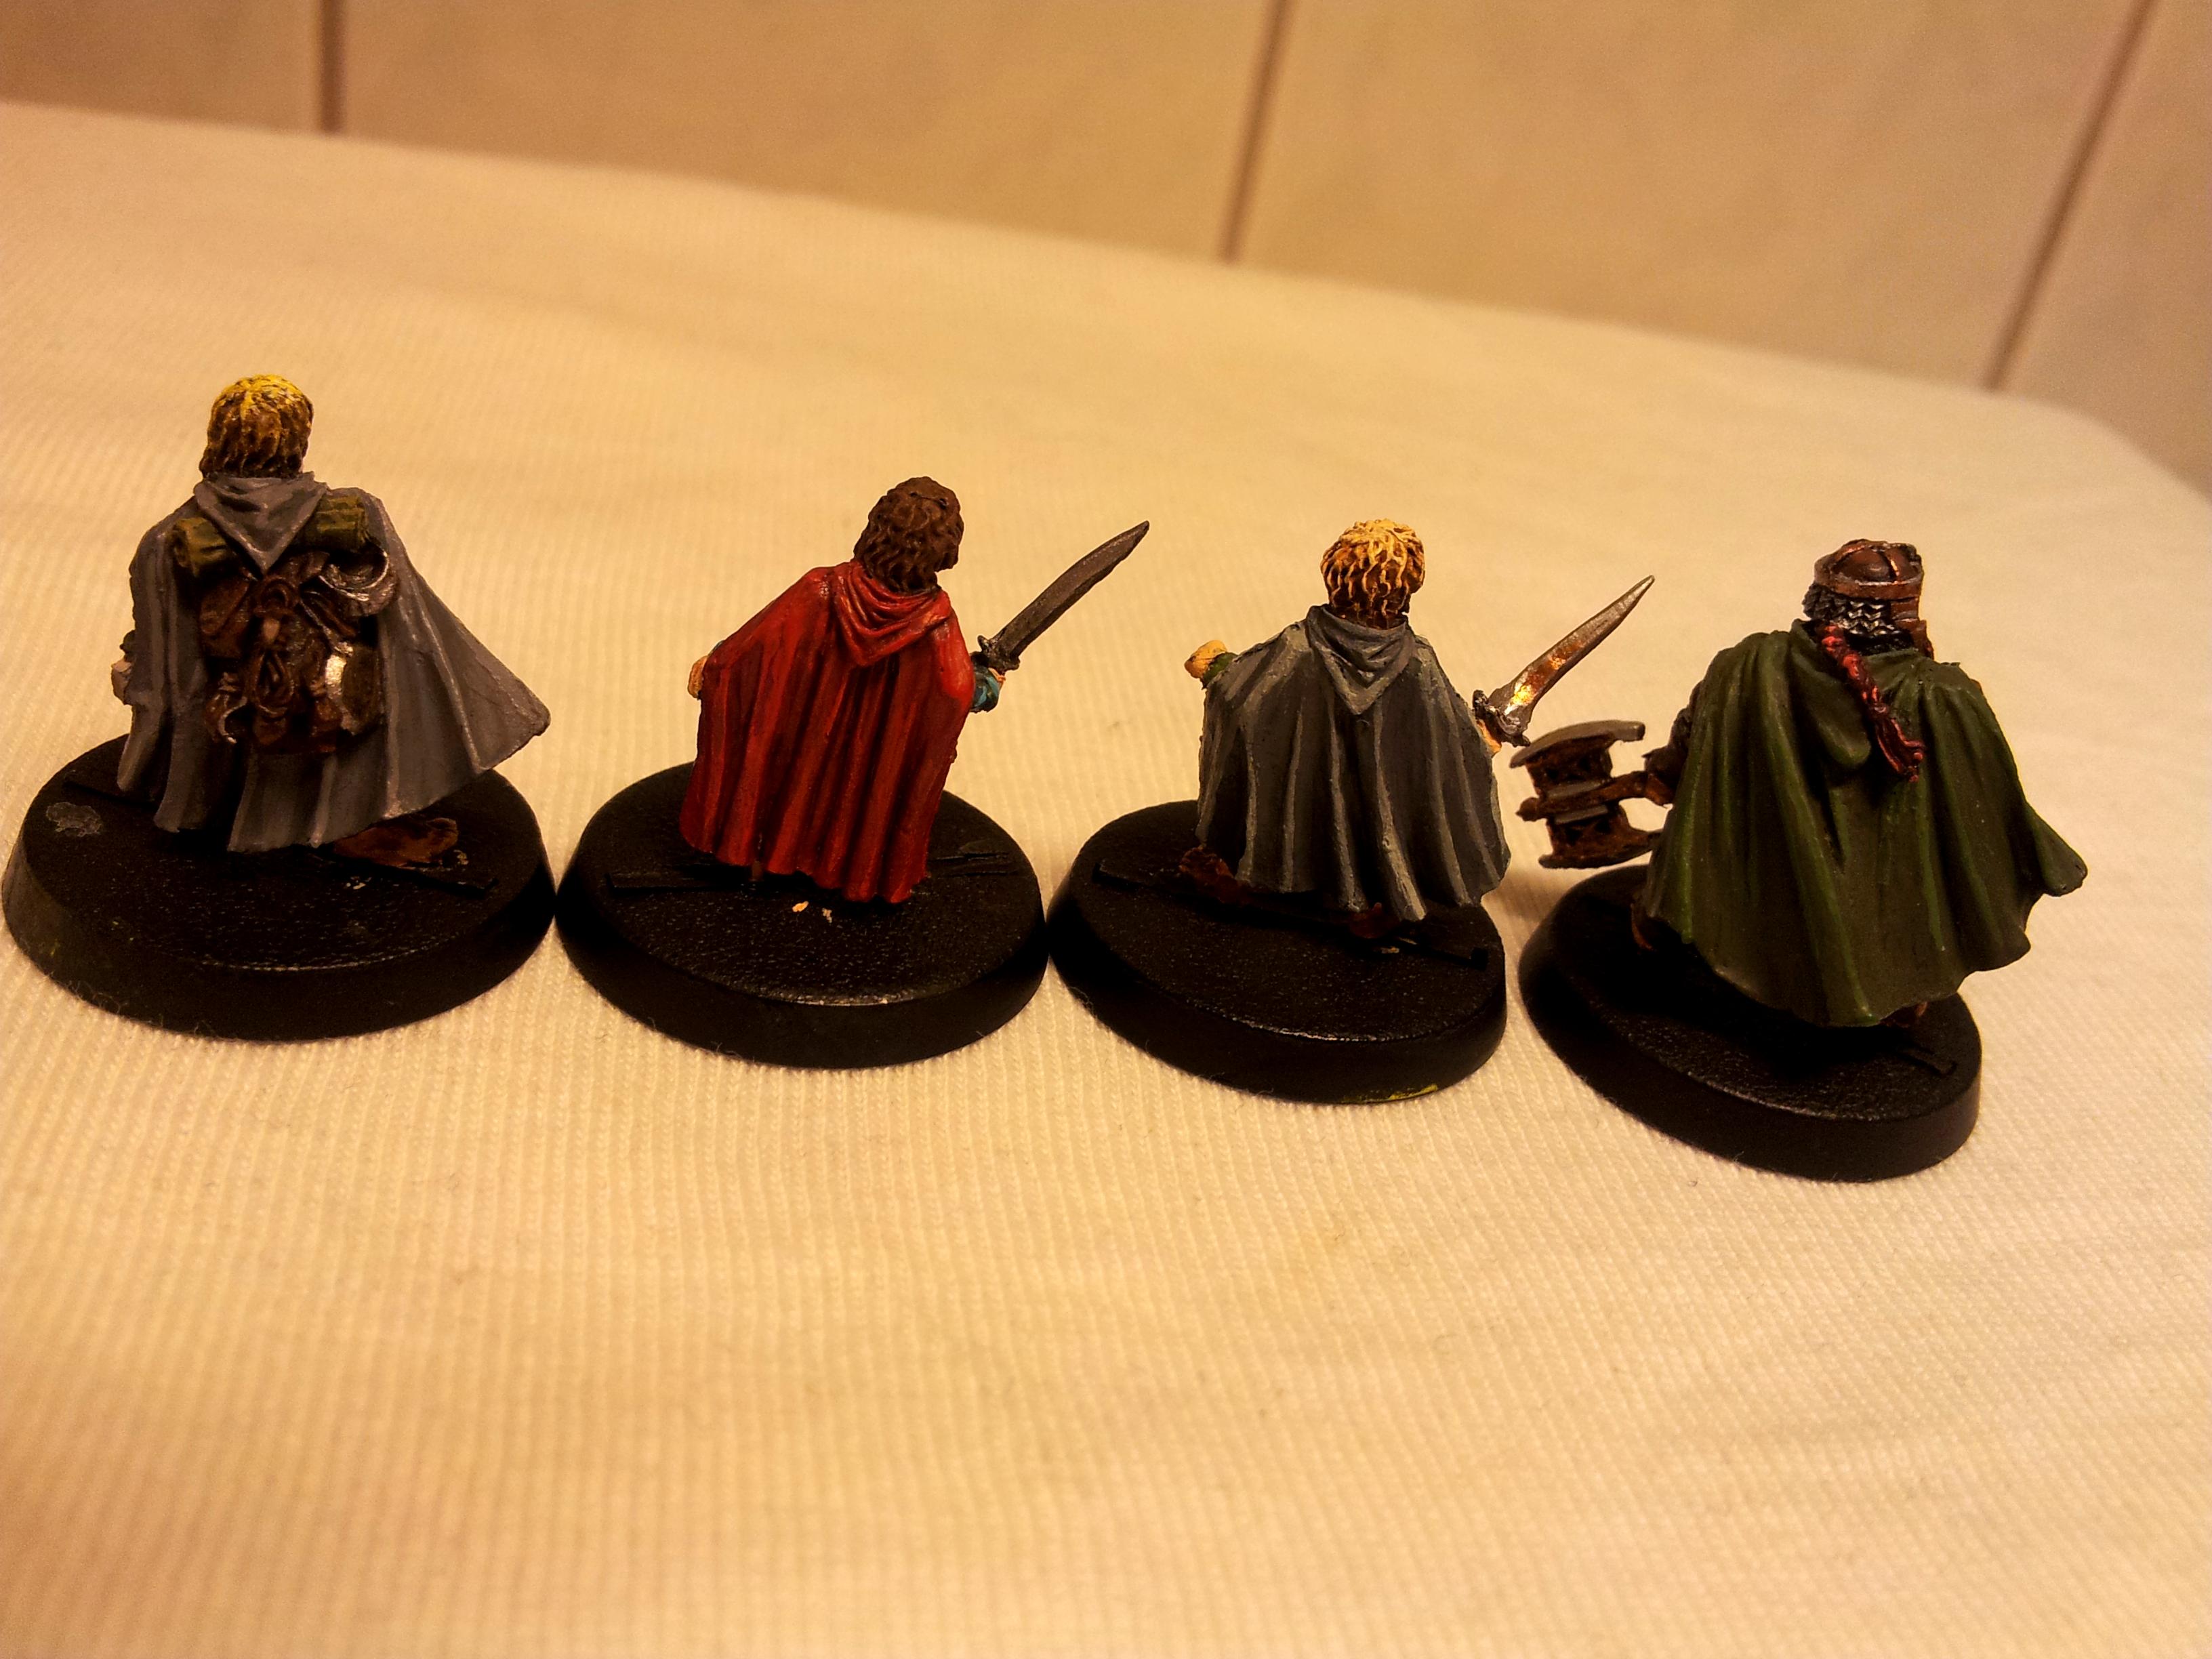 Gimli, Lord Of The Rings, Merry, Pippin, Sam, Samwise, The Fellowship